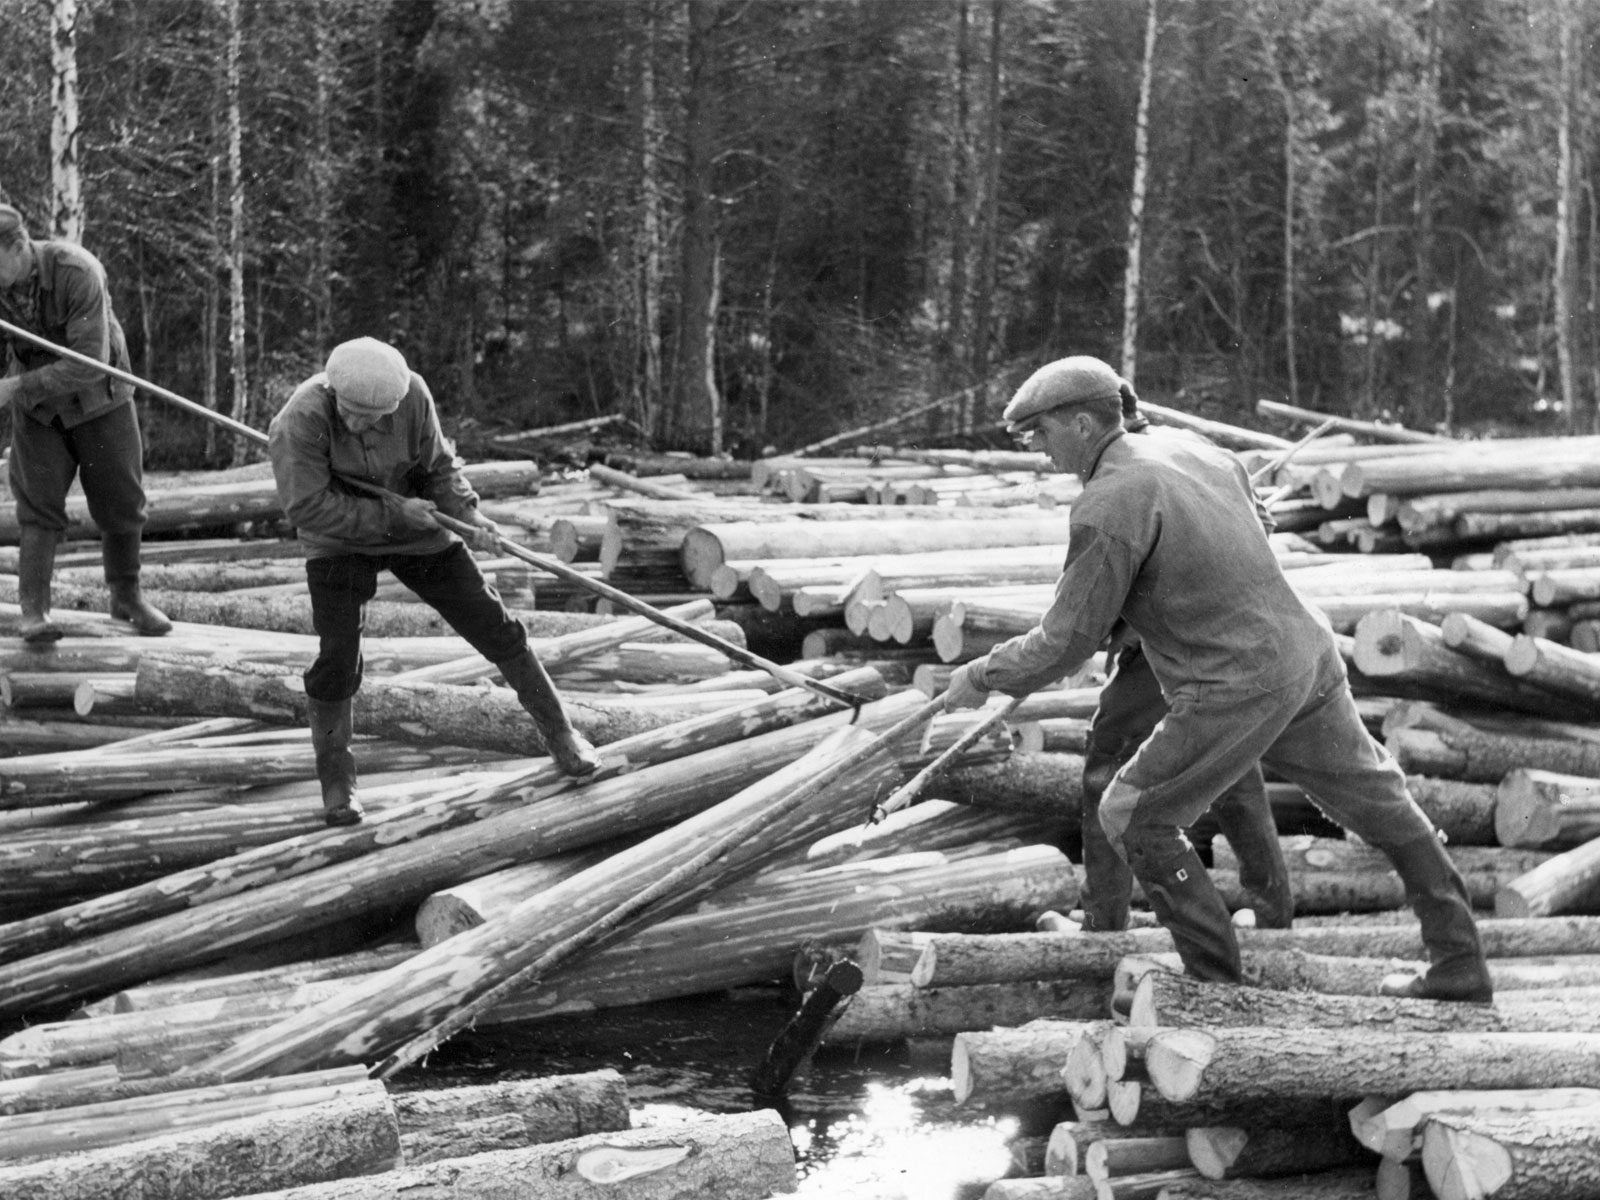 When driving timber, marking axes were used to secure ownership of the logs.